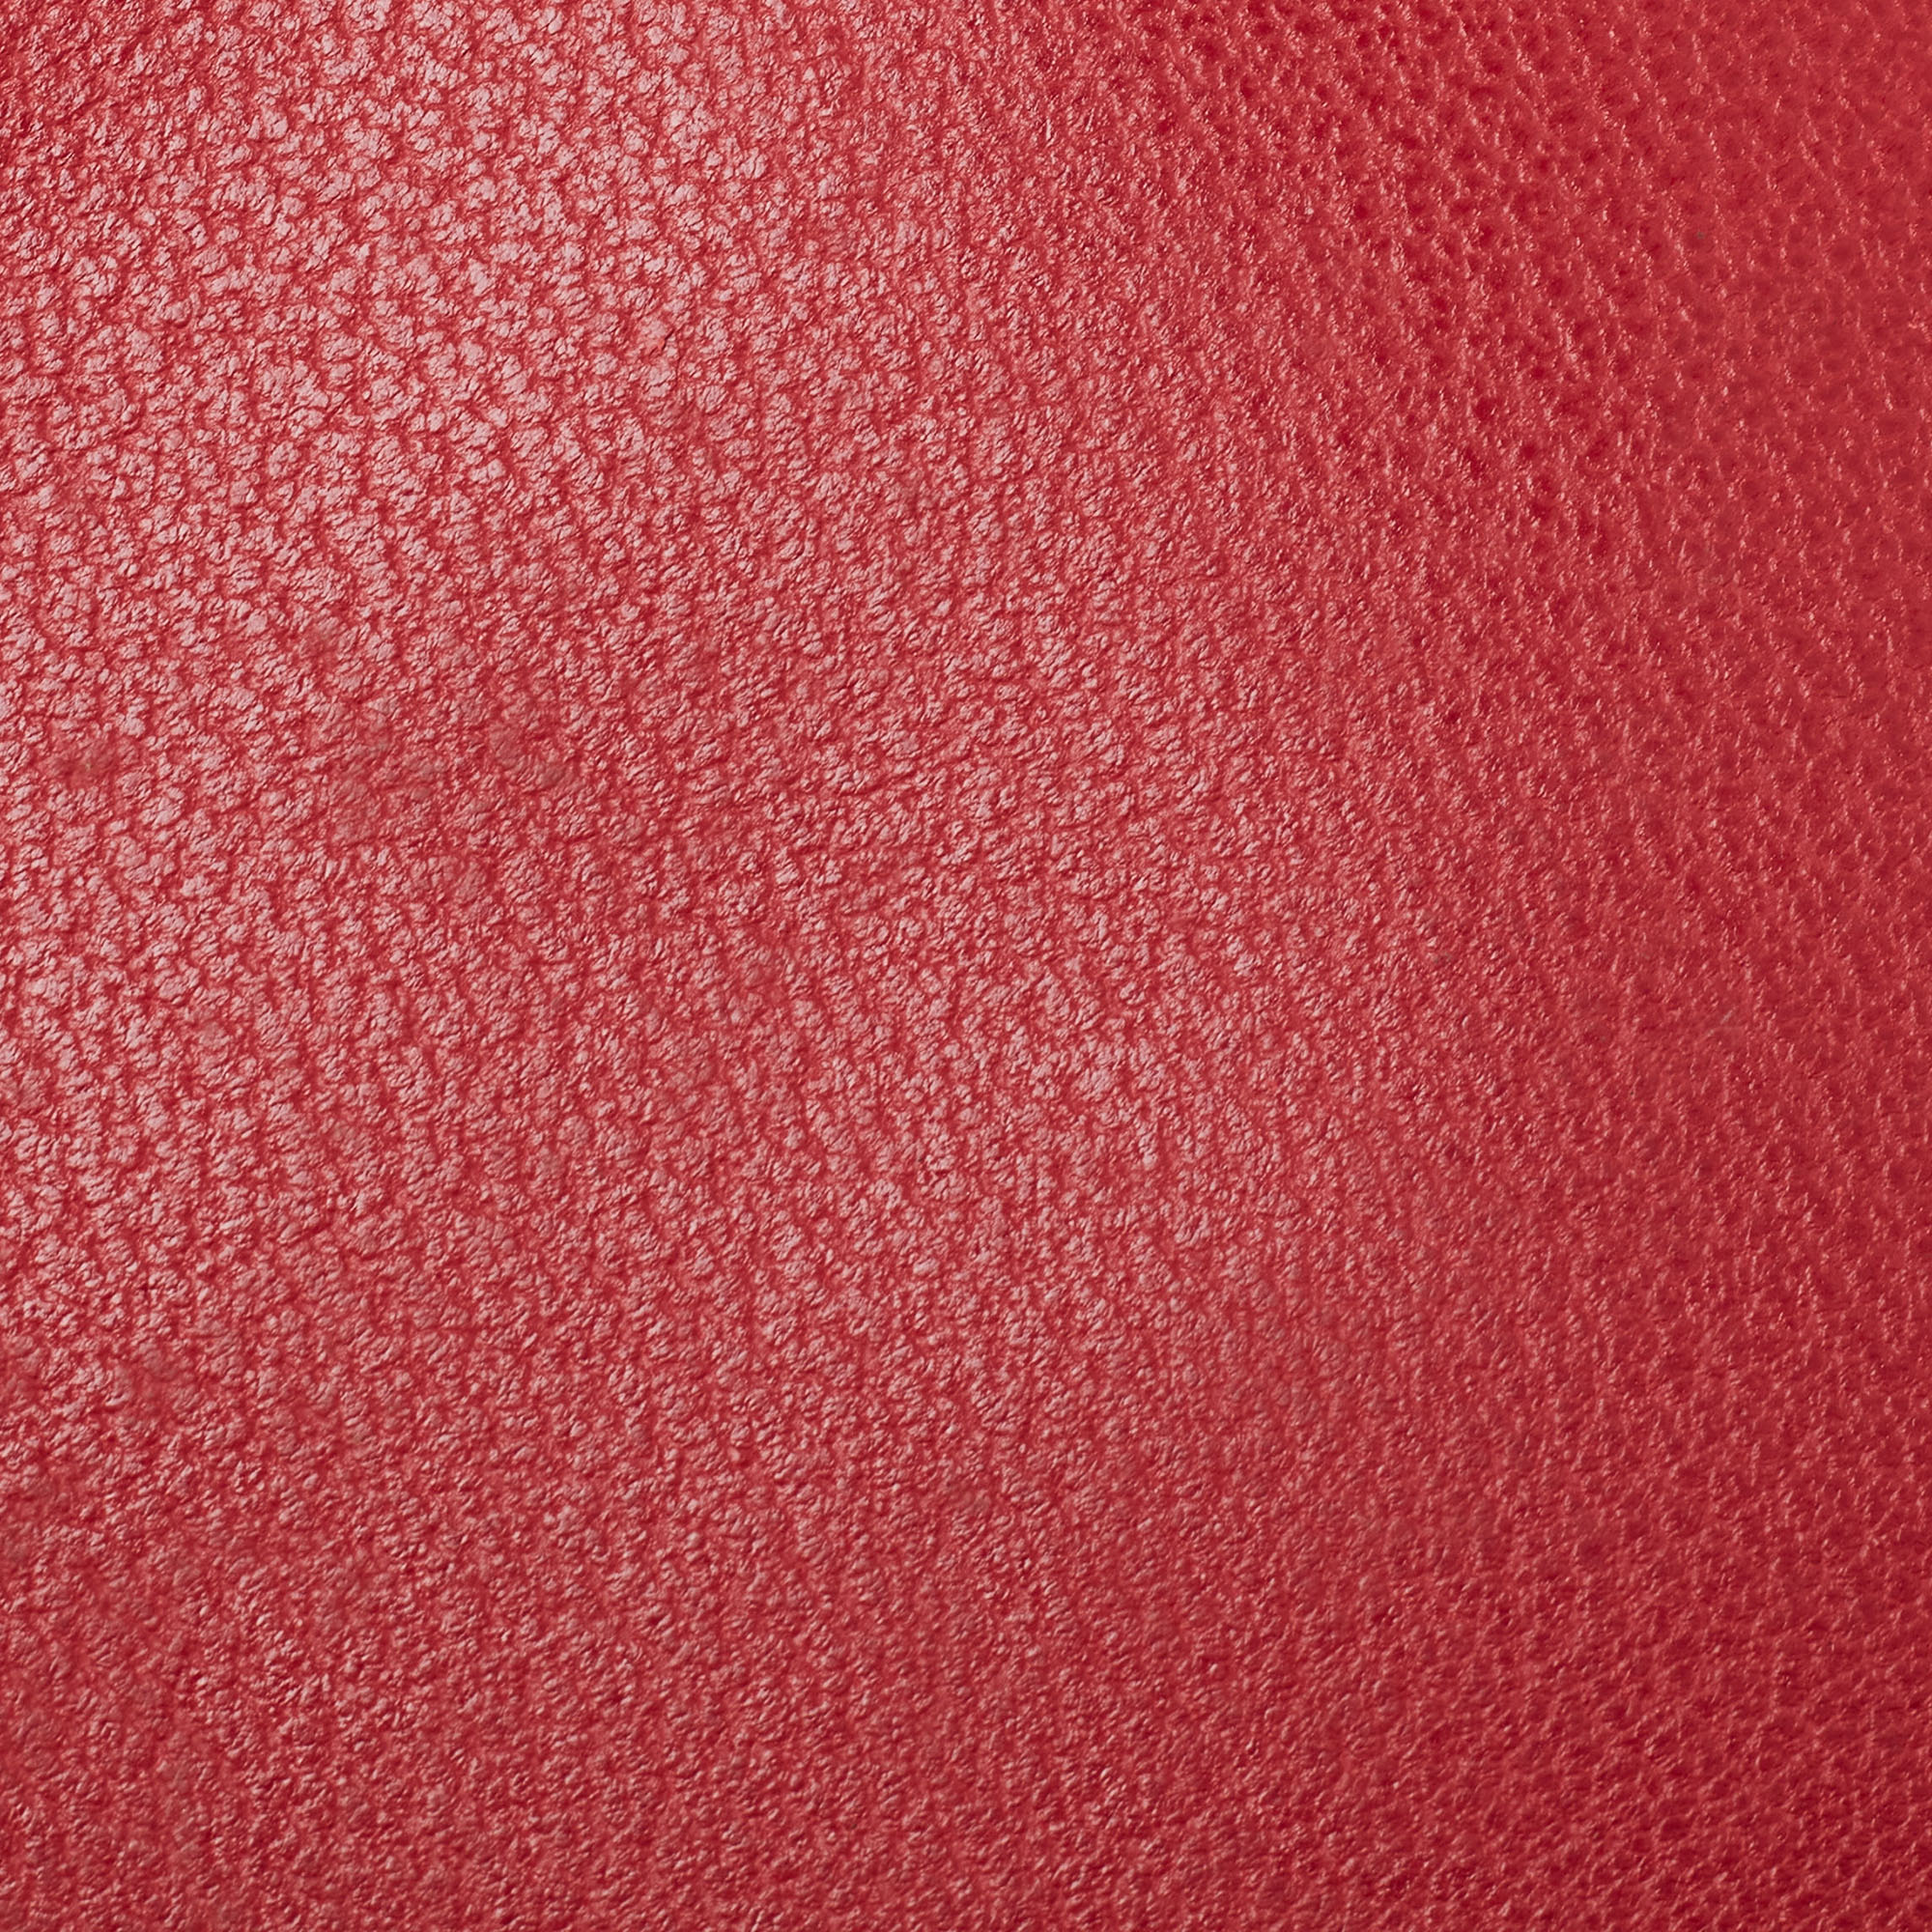 Gucci Red Leather Briefcase Bag